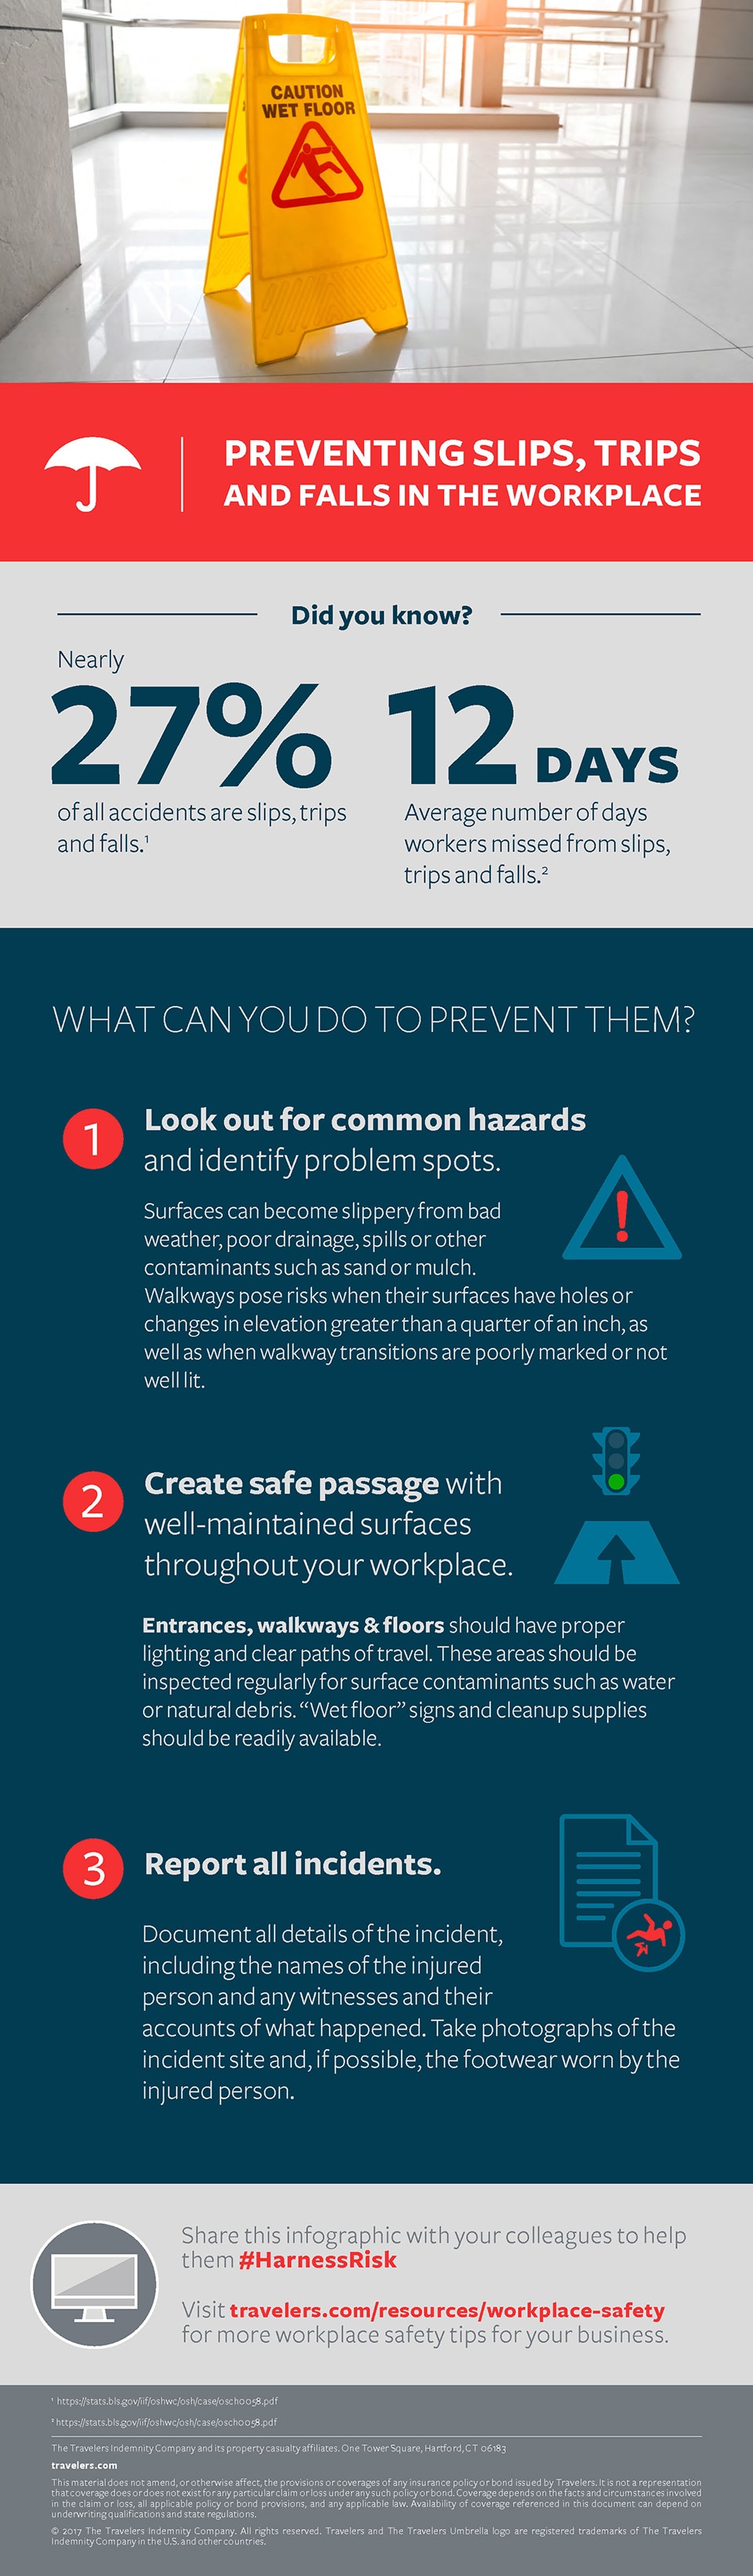 Preventing slips, trips and falls in the workplace infographic